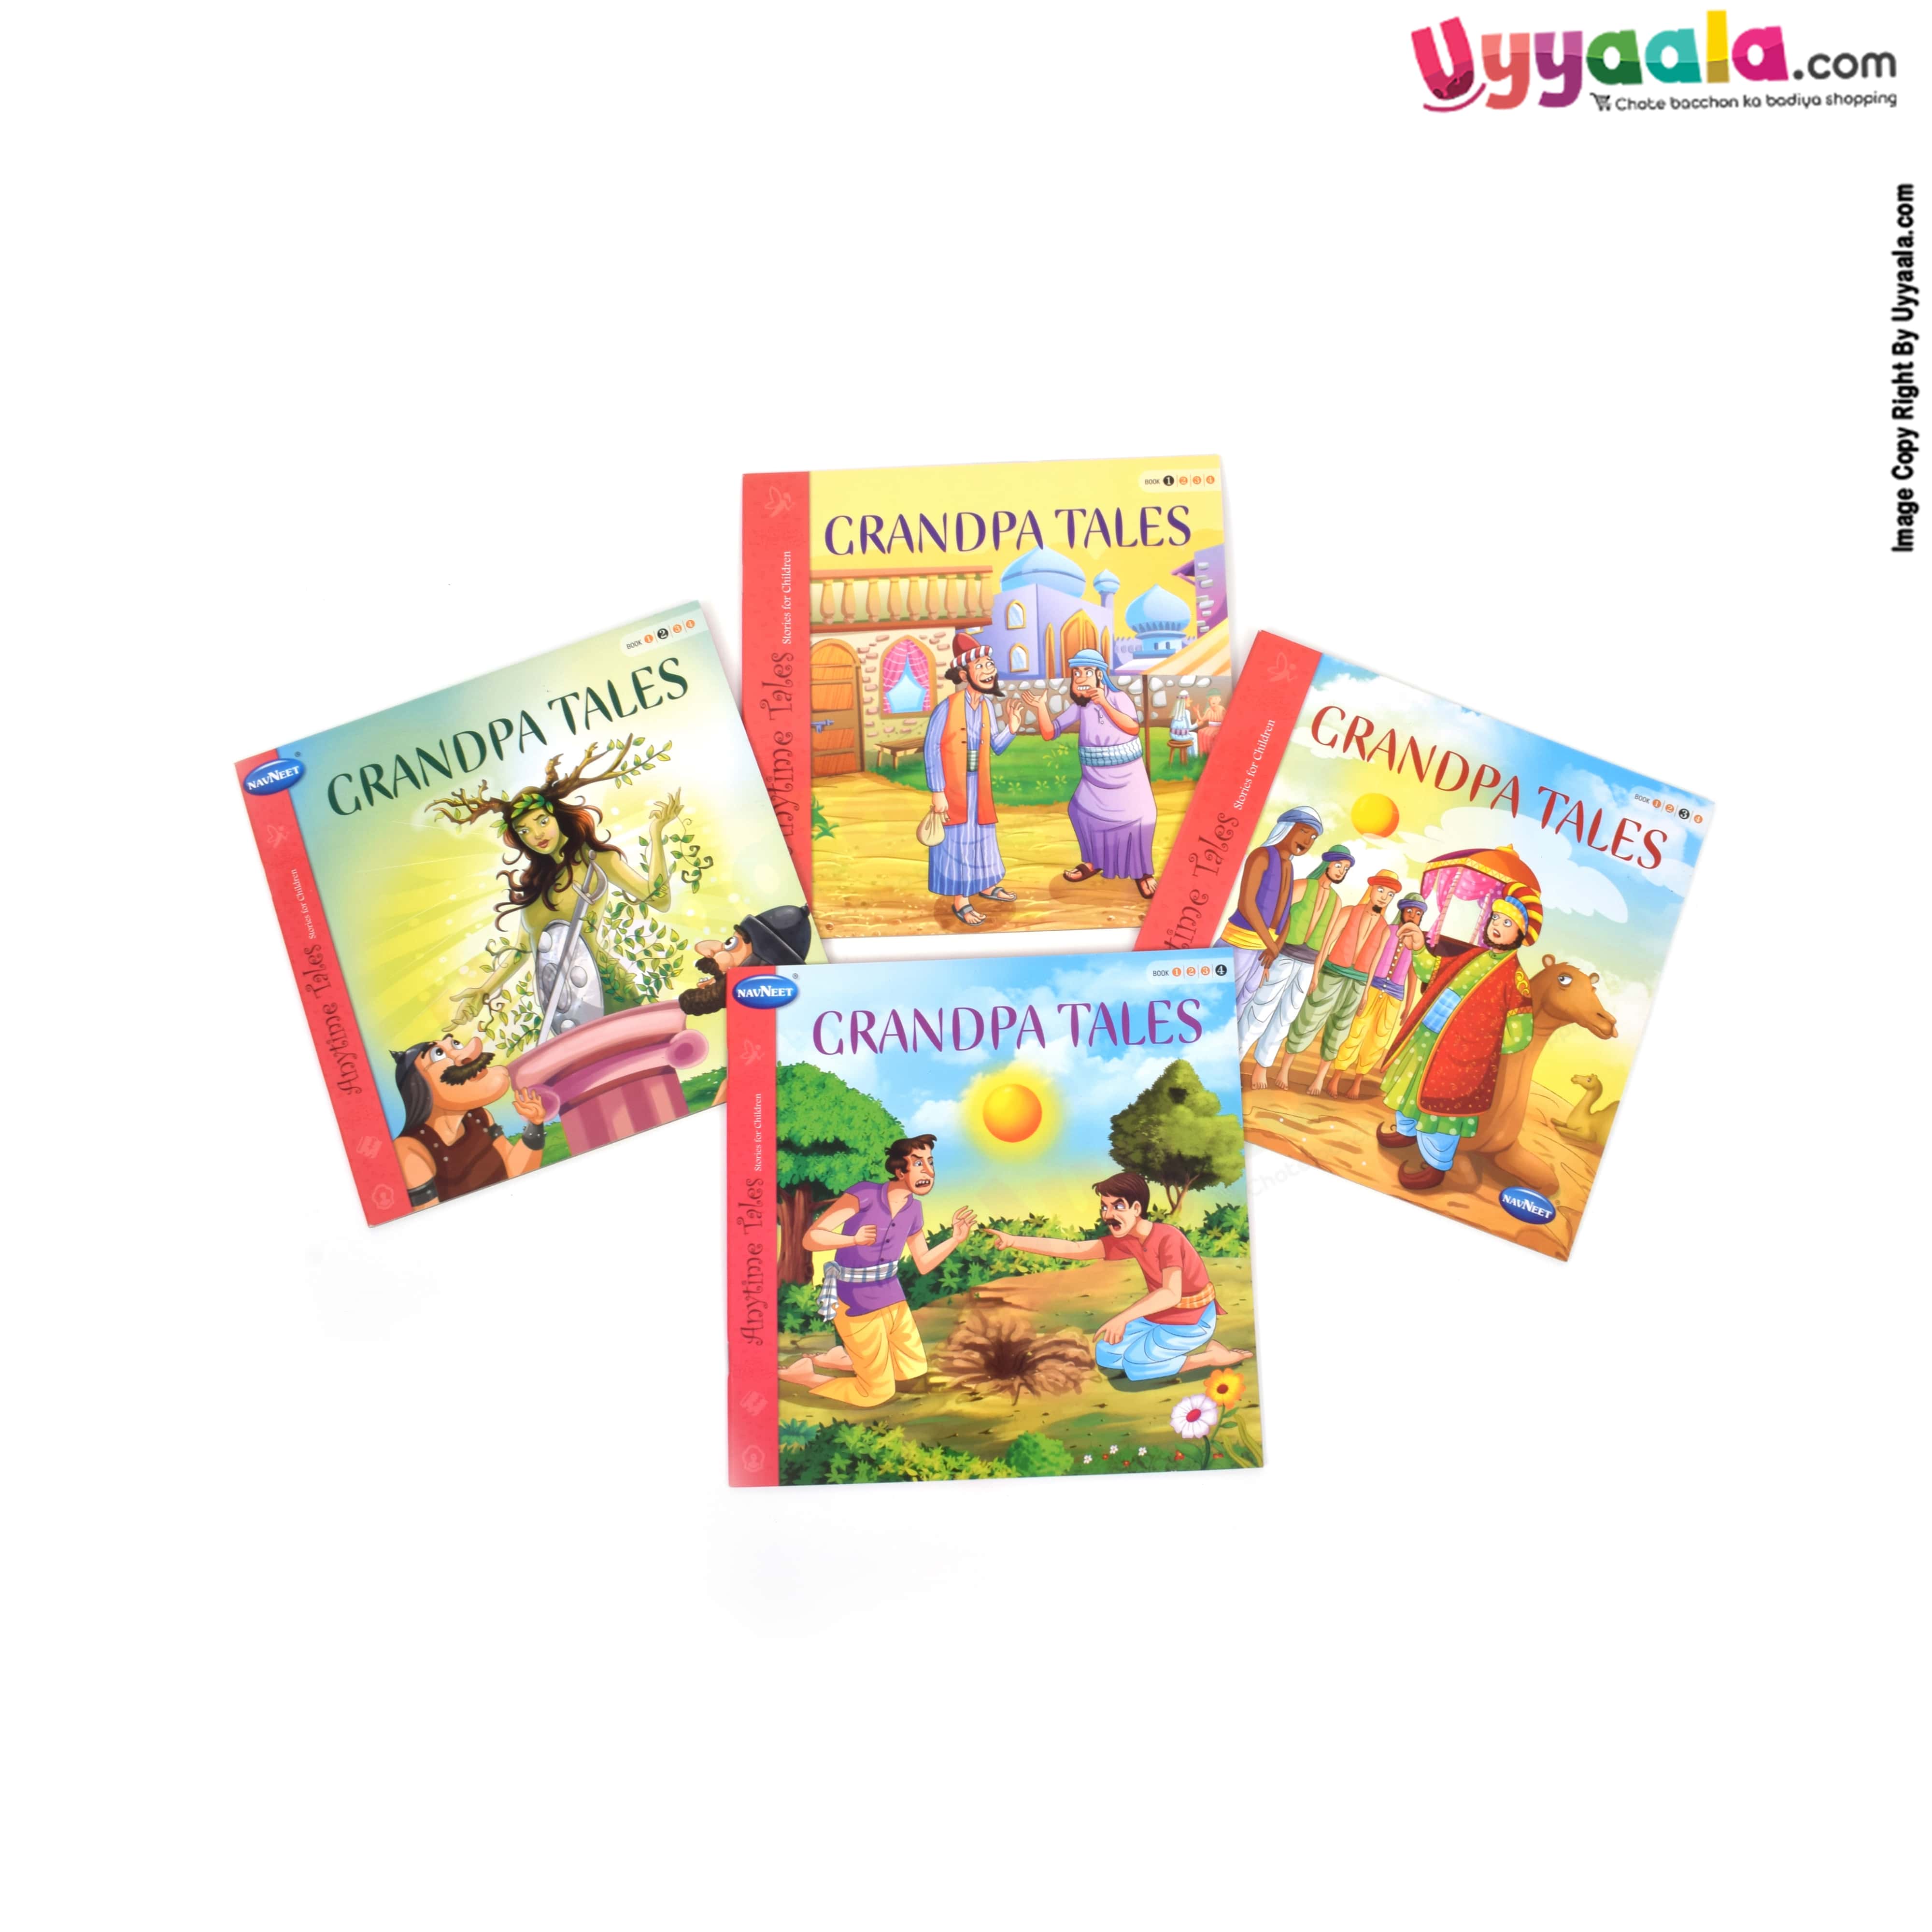 NAVNEET any time tales stories for children, grandpa tales Pack of 4 - 4 Volumes